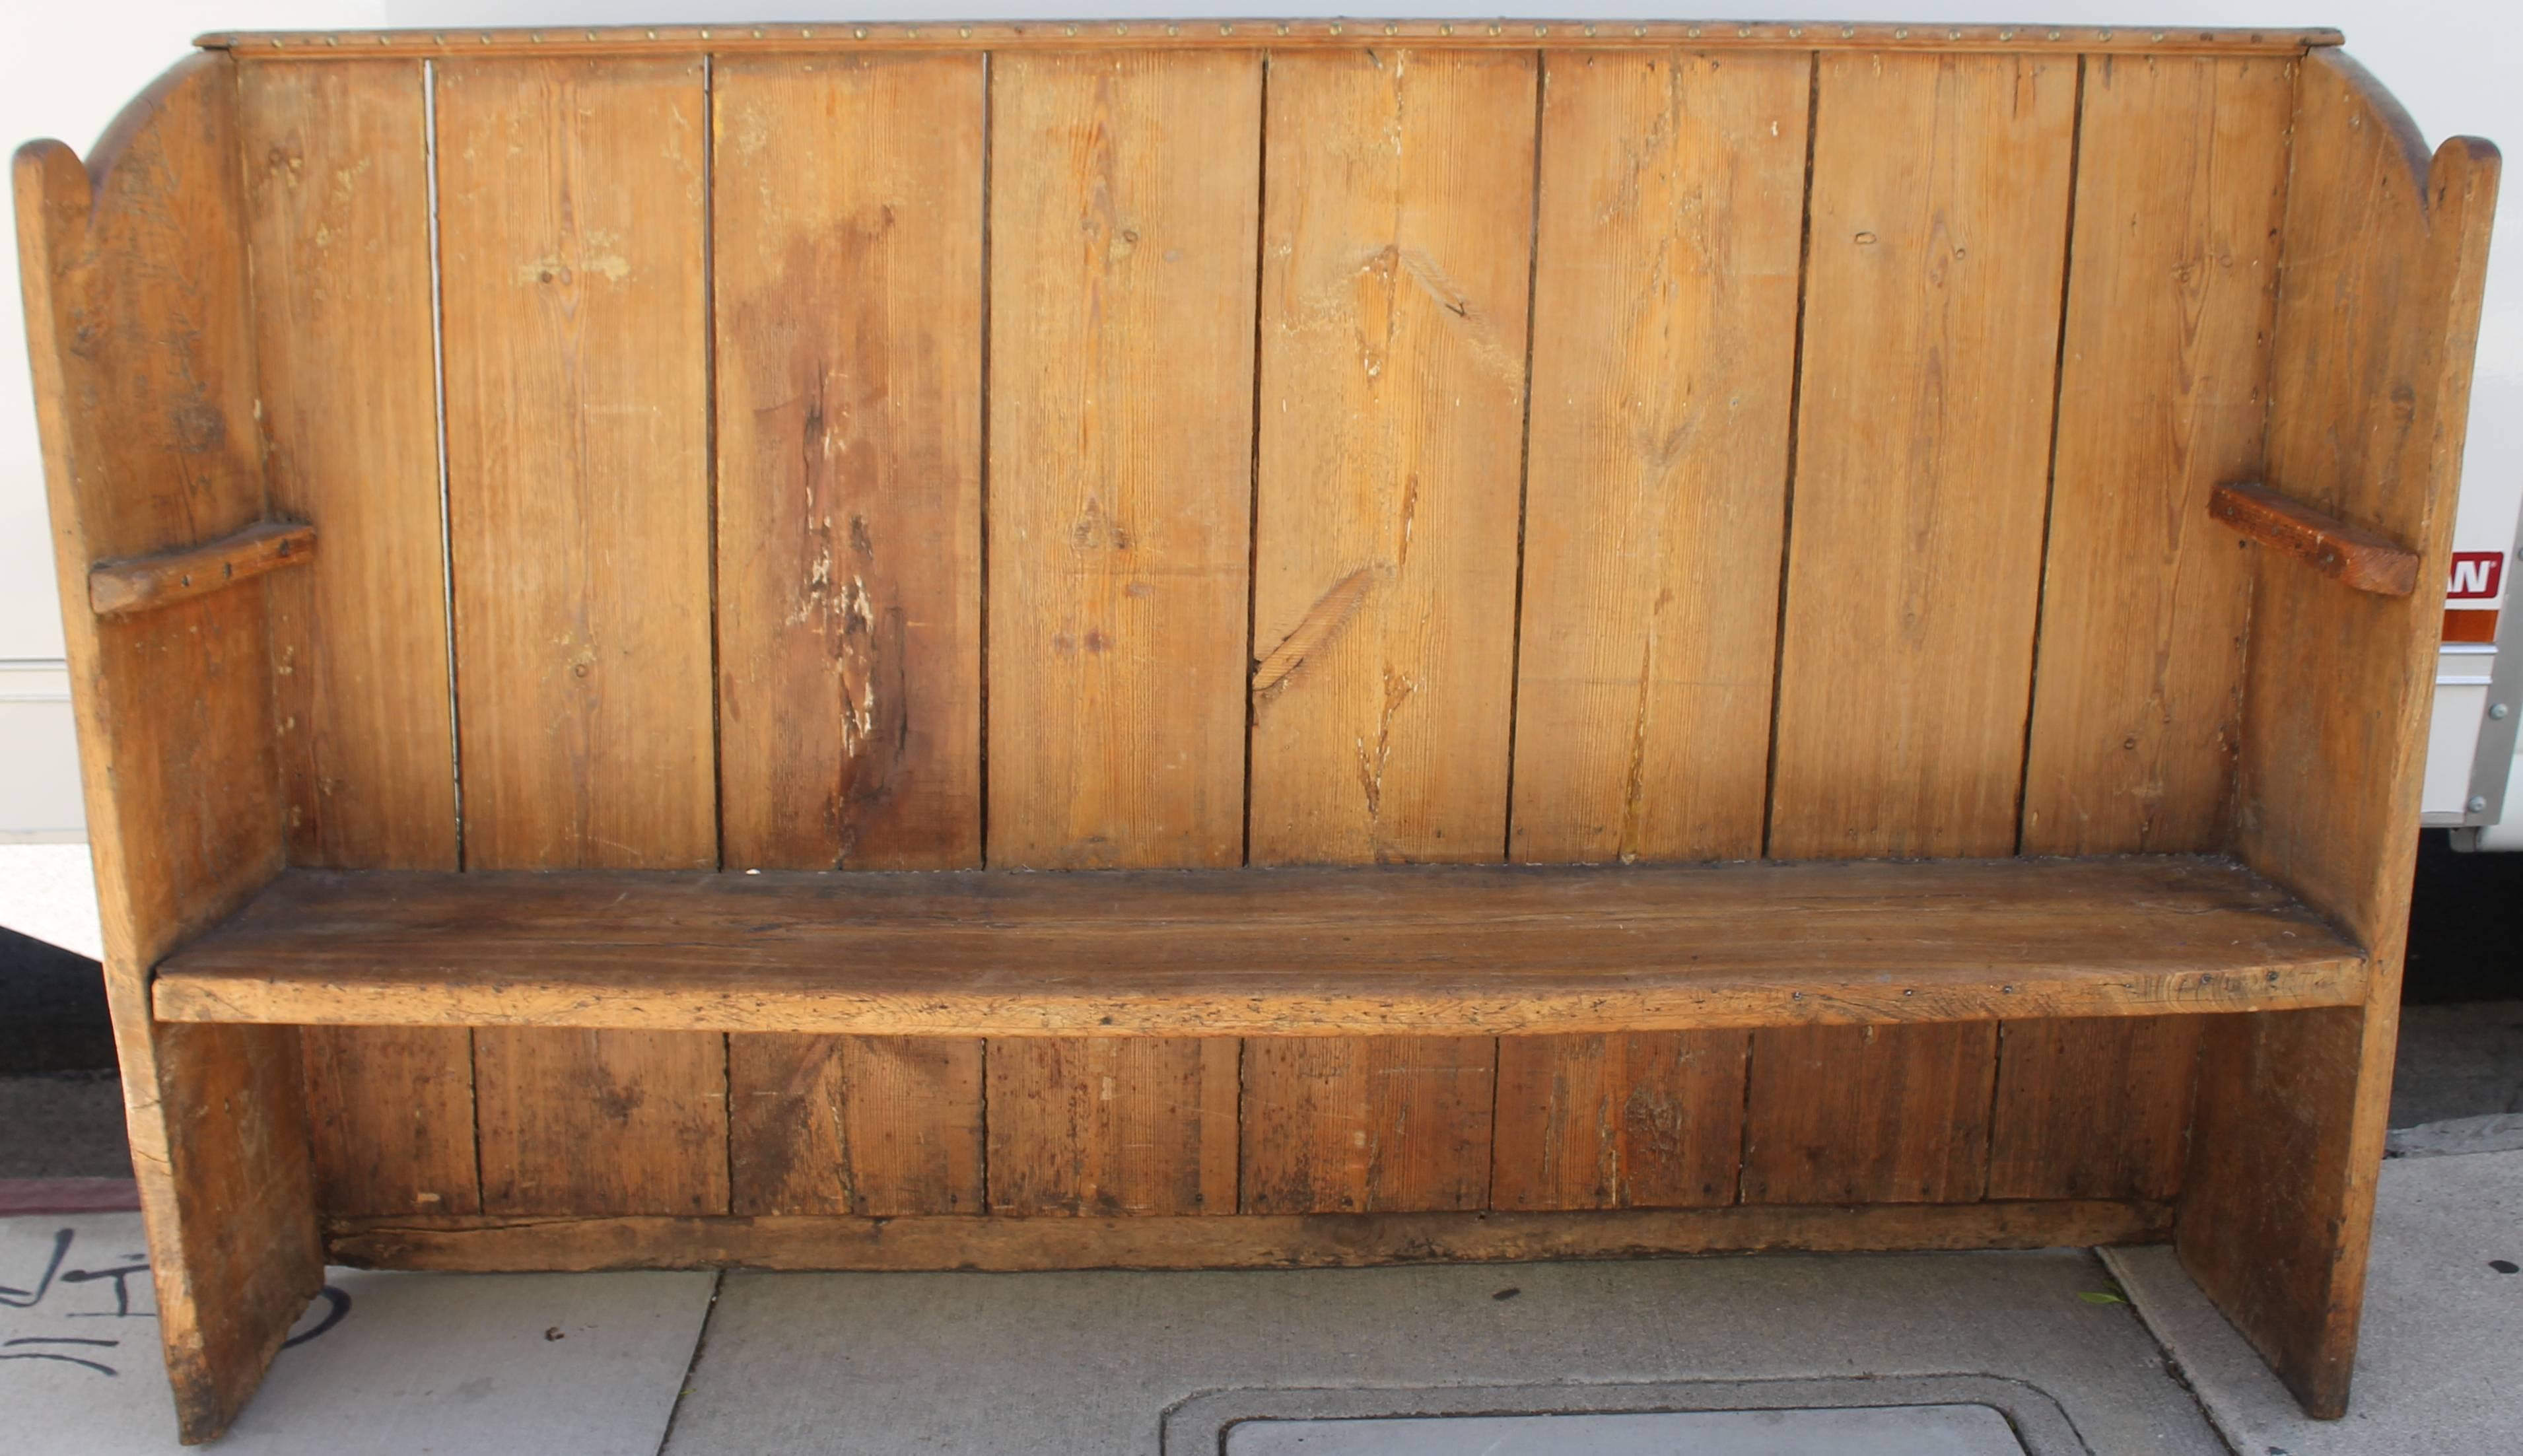 This early rustic settle is made with wide plank boards and early handmade nails. It is in sturdy as found condition with a wonderful aged patina. There is also original brass tacks on the top trim molding. Great for a country or western setting.